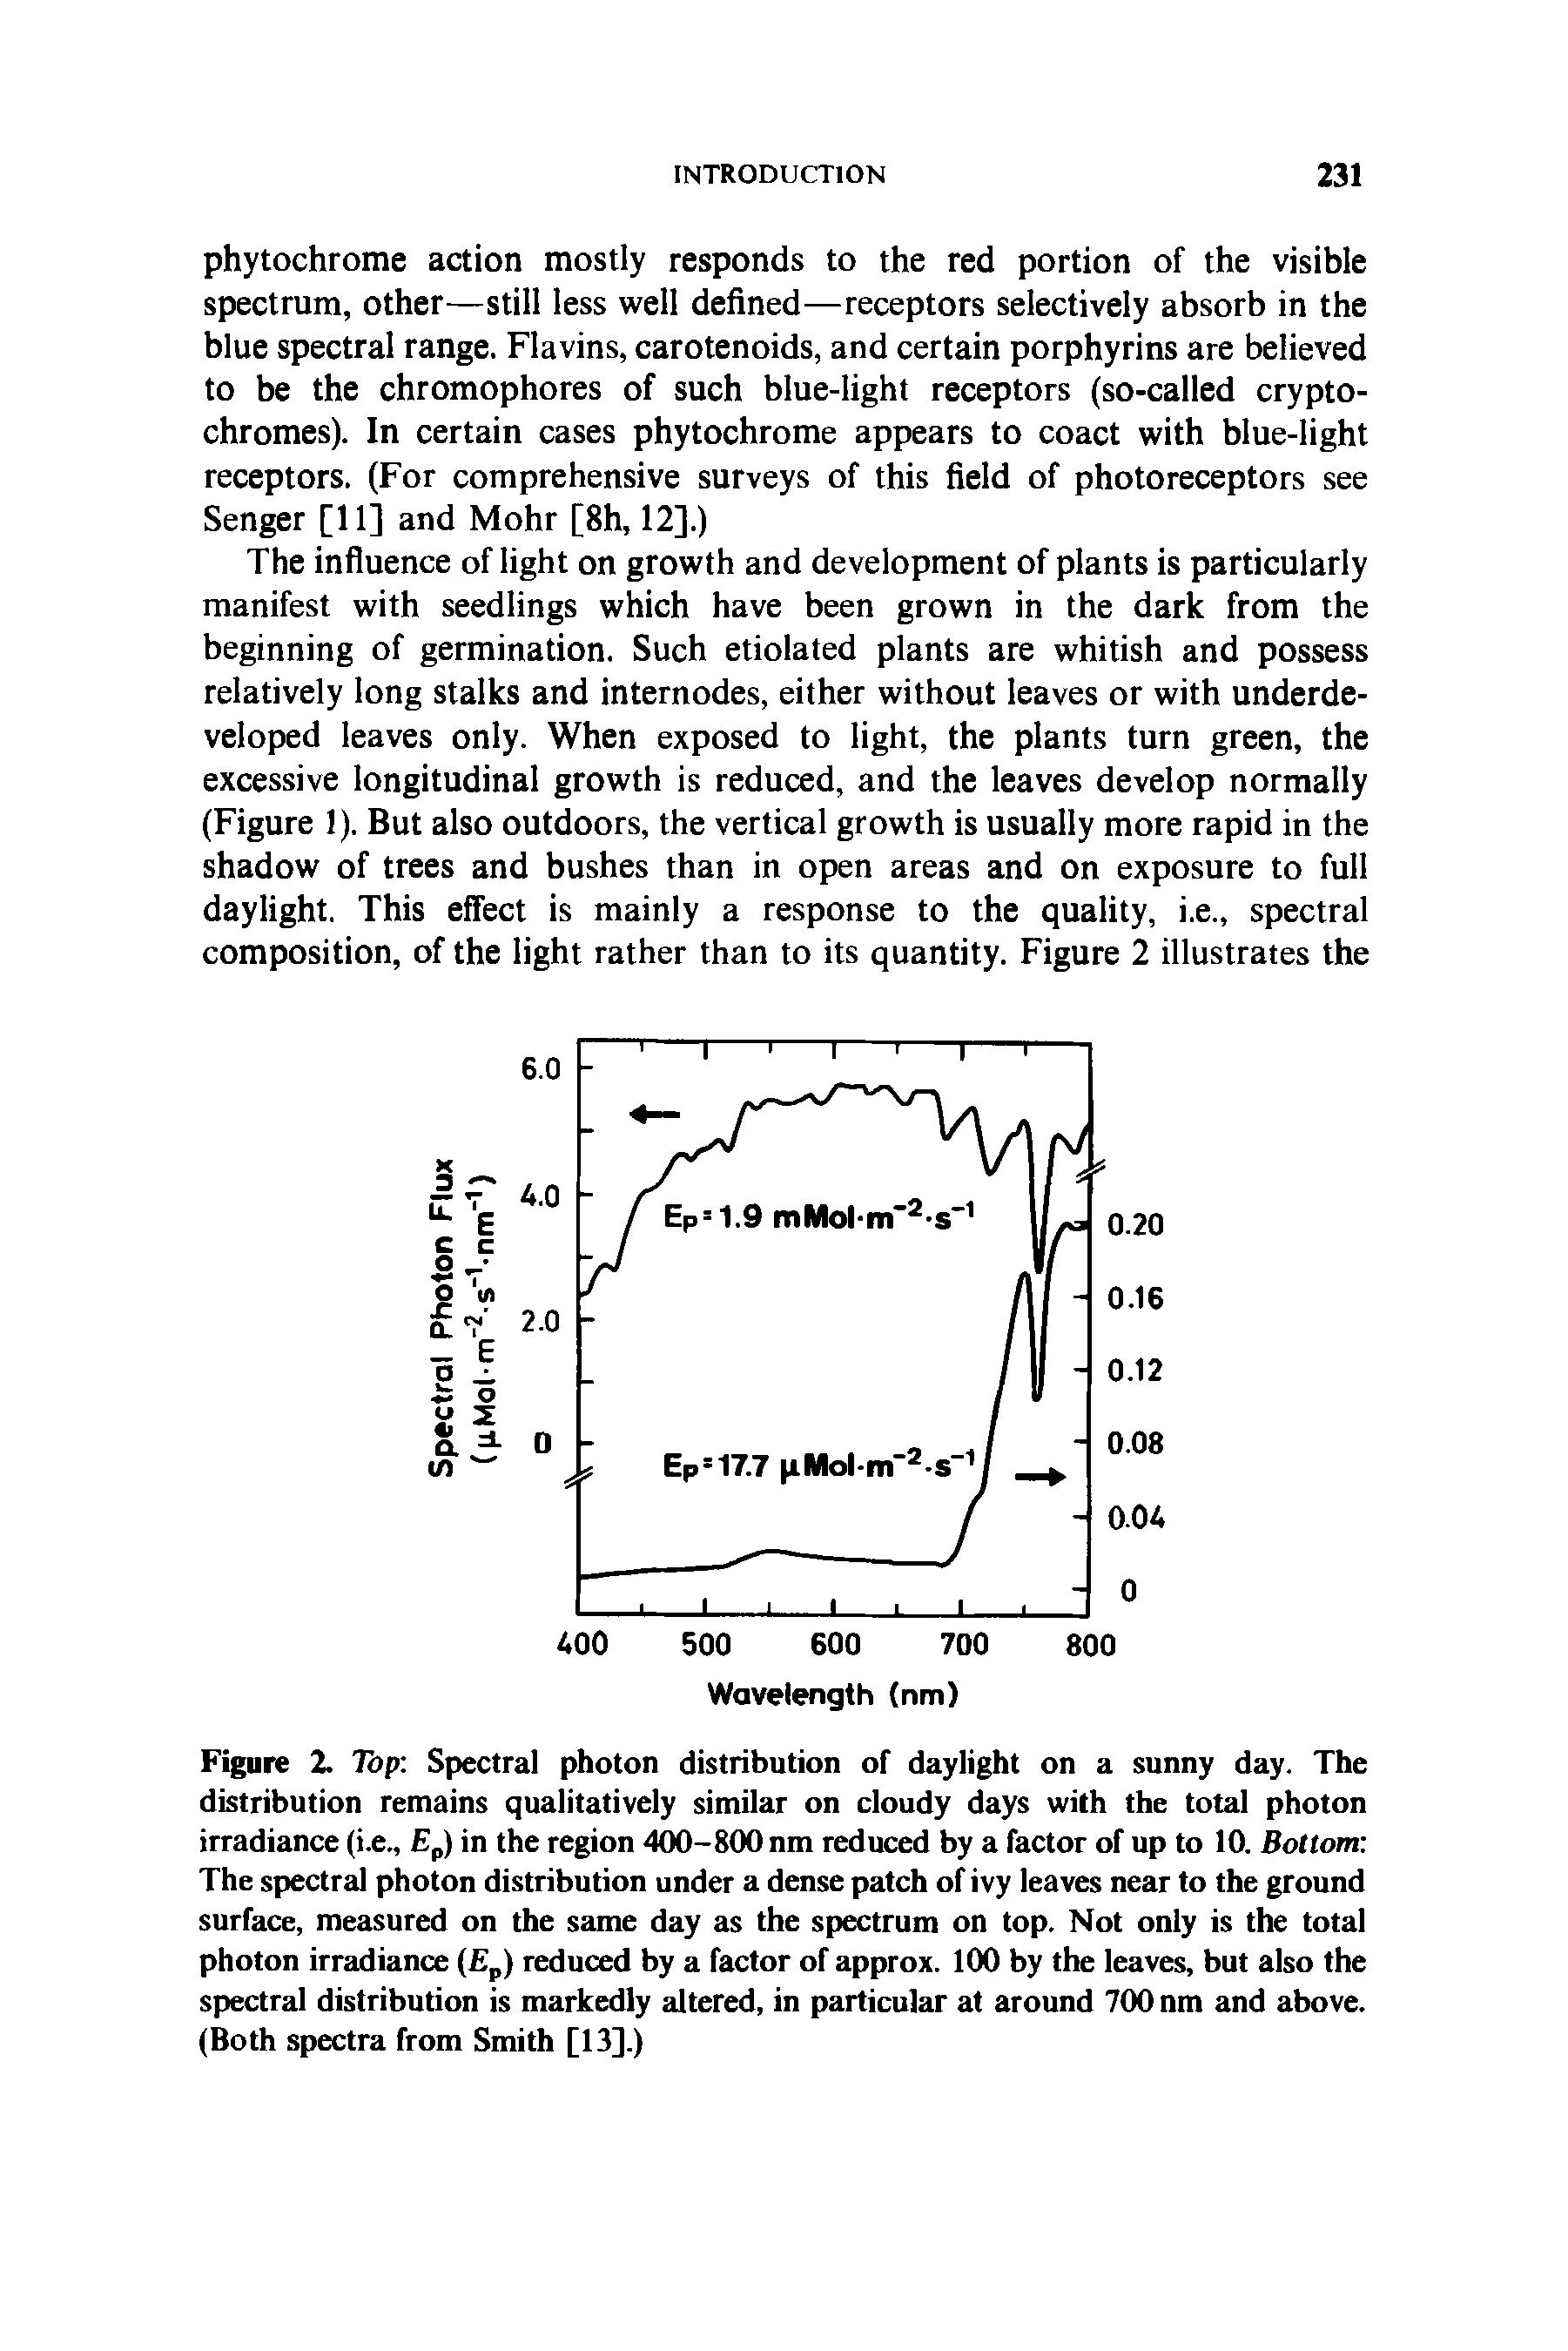 Figure 2. Top Spectral photon distribution of daylight on a sunny day. The distribution remains qualitatively similar on cloudy days with the total photon irradiance (i.e., Ep) in the region 400-800 nm reduced by a factor of up to 10. Bottom The spectral photon distribution under a dense patch of ivy leaves near to the ground surface, measured on the same day as the spectrum on top. Not only is the total photon irradiance (Ep) reduced by a factor of approx. 100 by the leaves, but also the spectral distribution is markedly altered, in particular at around 700 nm and above. (Both spectra from Smith [13].)...